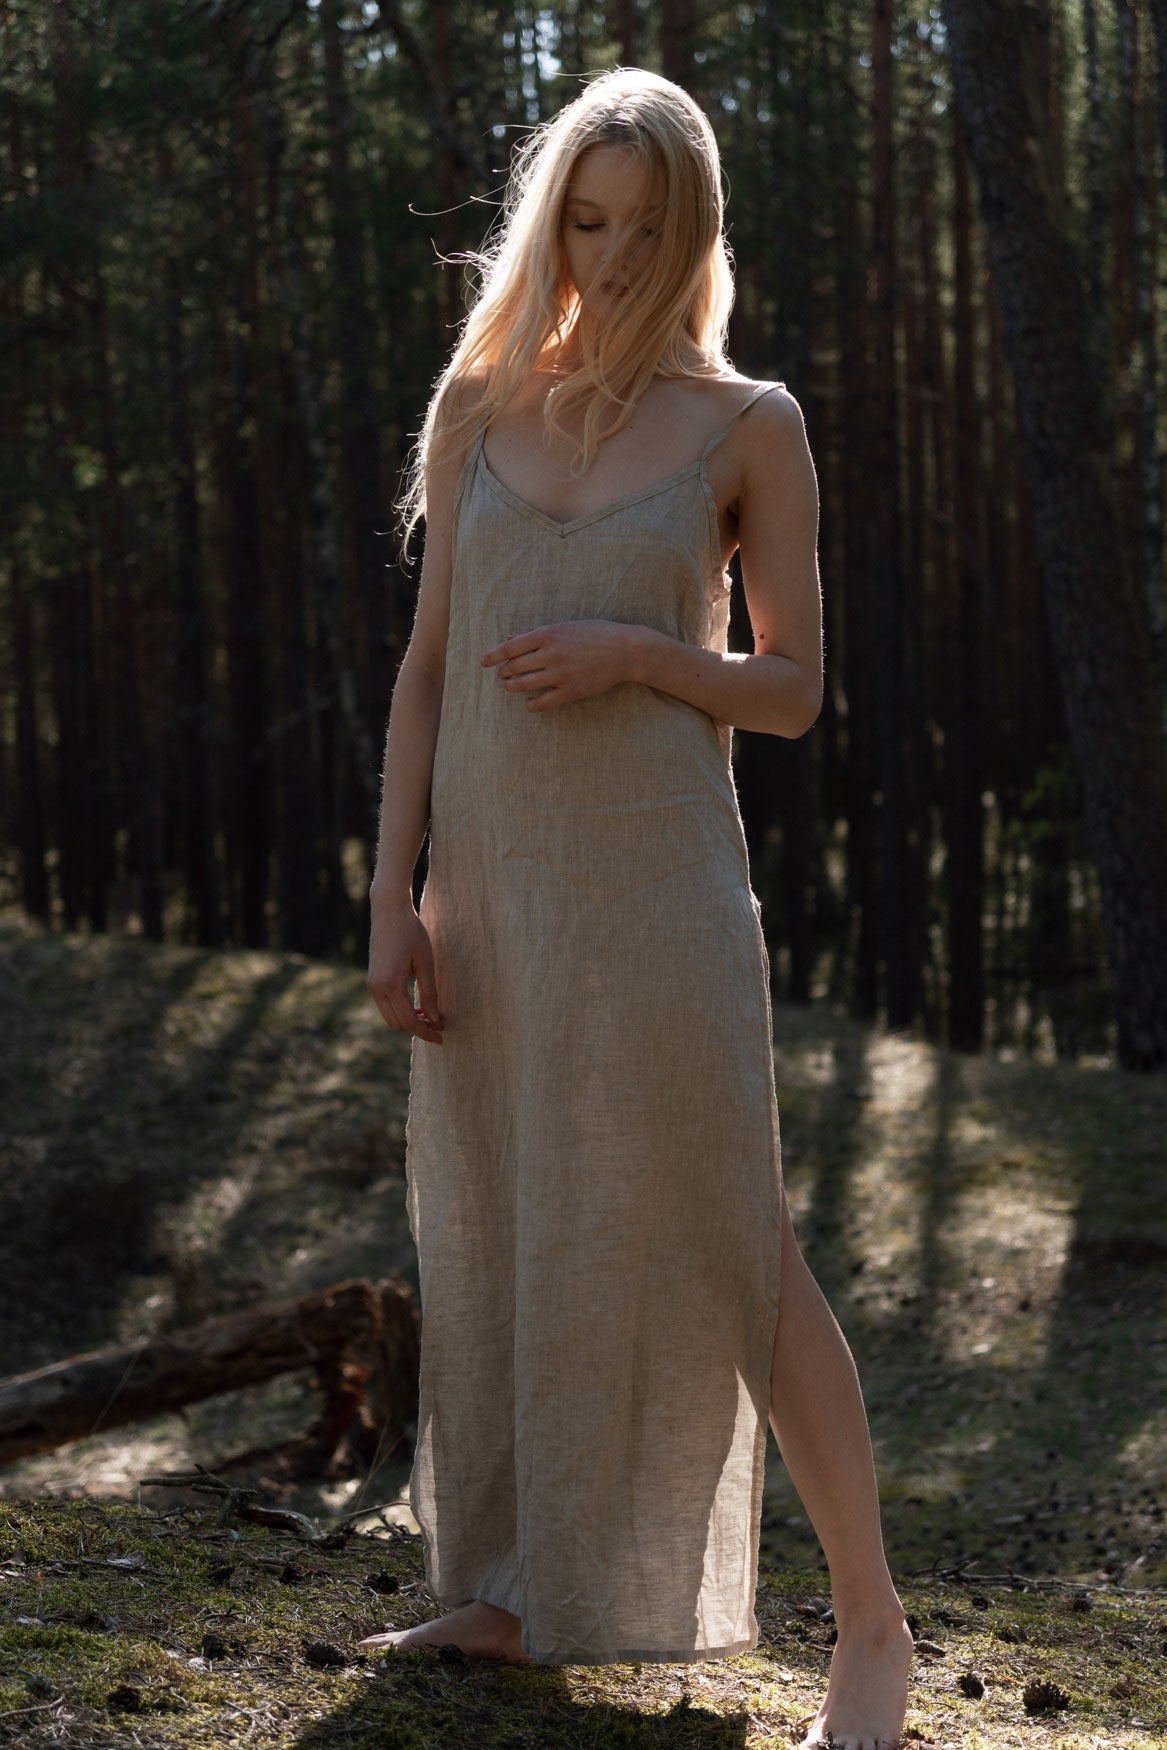 Organic, sustainable, sexy, long beige linen nightwear slip dress with spaghetti straps and splits. This linen lingerie nightdress is natural, comfortable, soft and pure. This sleepwear nightgown is a conscious and healthy choice for your body and environment.